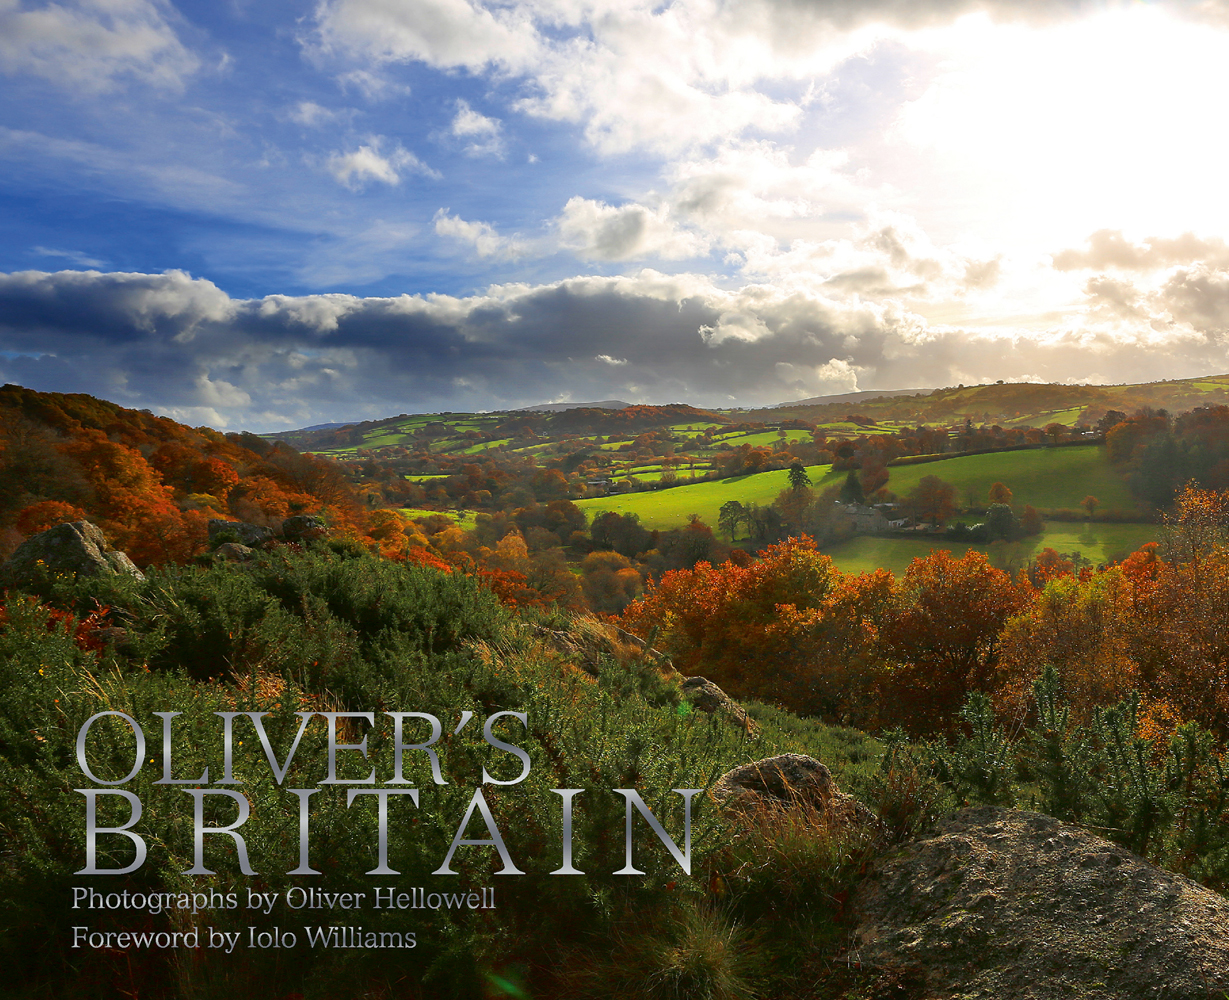 Hilly British landscape with blue cloudy sky above, on cover of 'Oliver's Britain', by ACC Art Books.